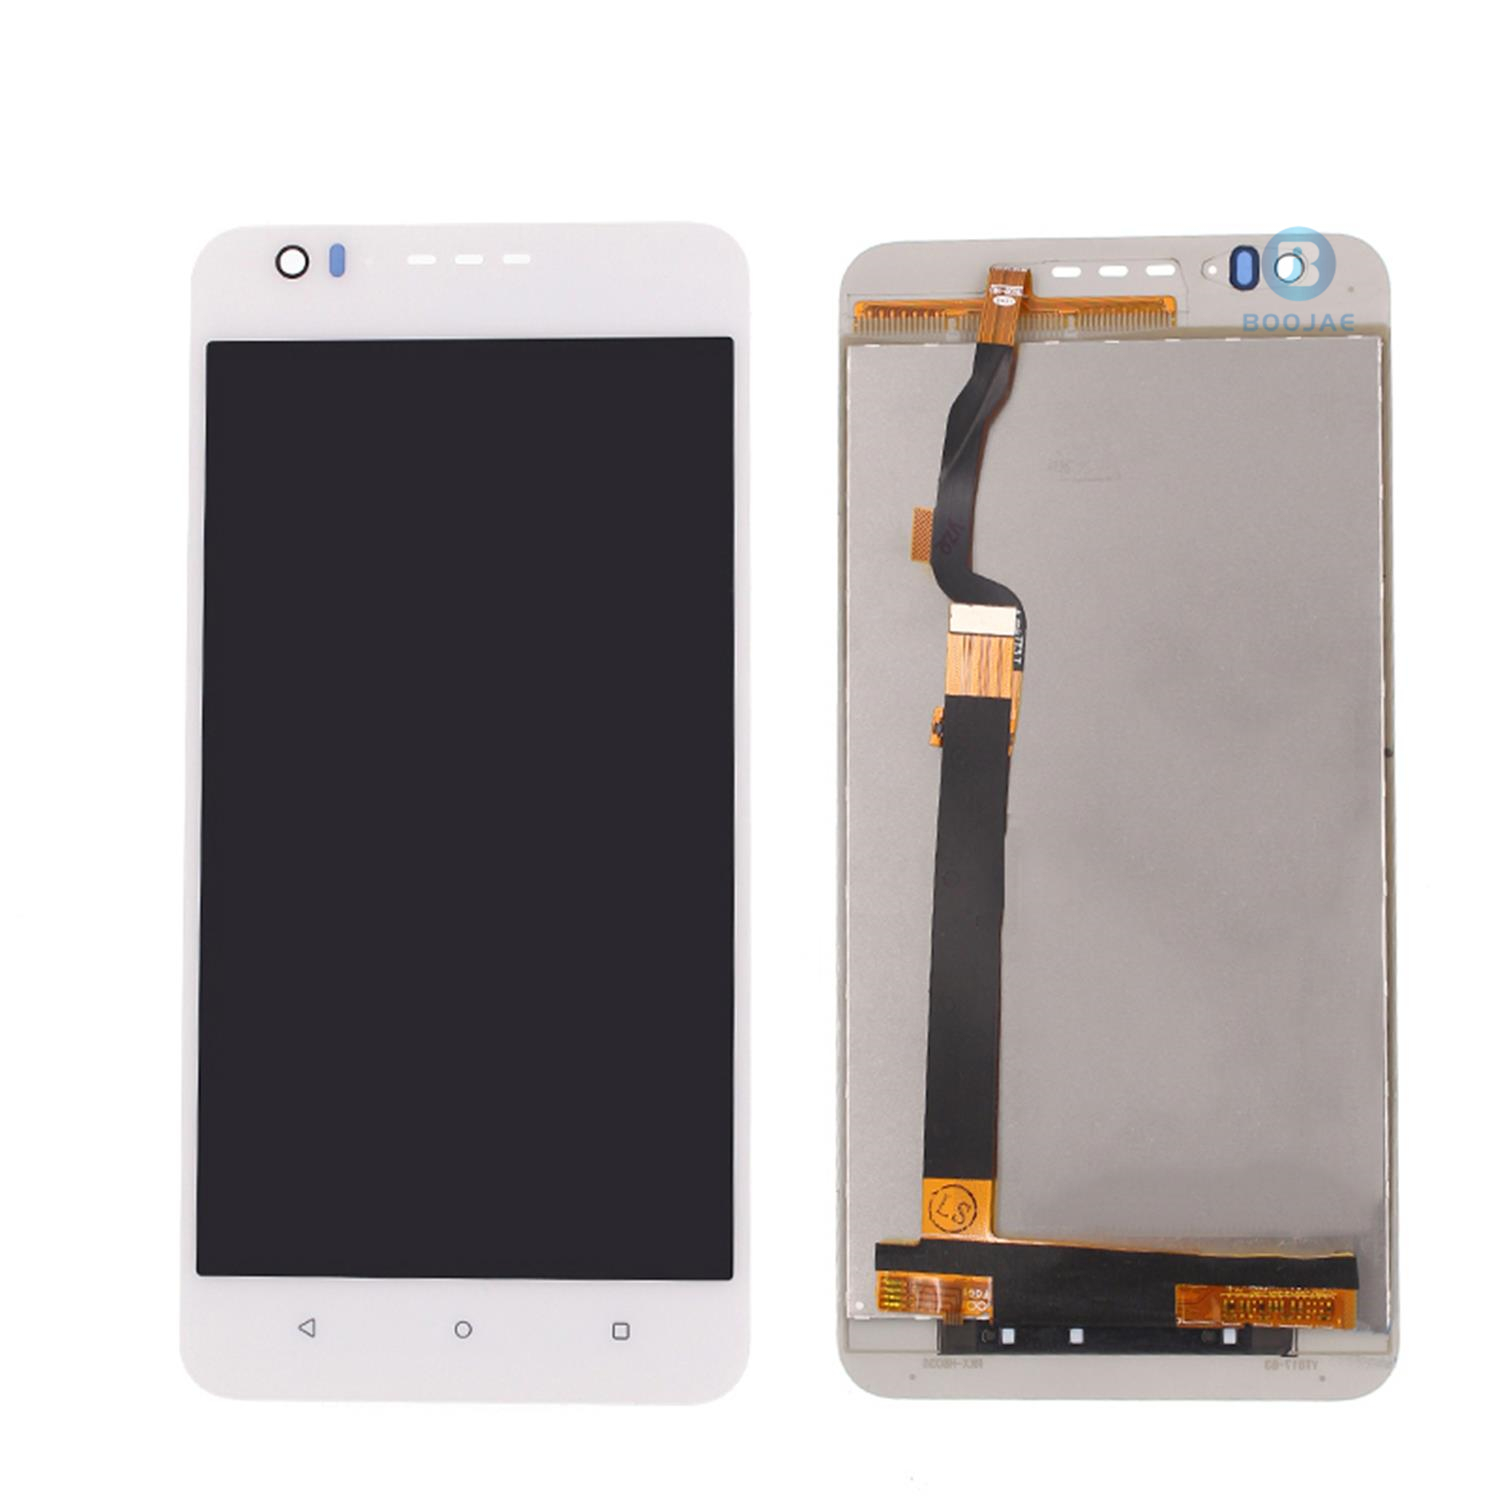 For HTC Desire 825 LCD Screen Display and Touch Panel Digitizer Assembly Replacement